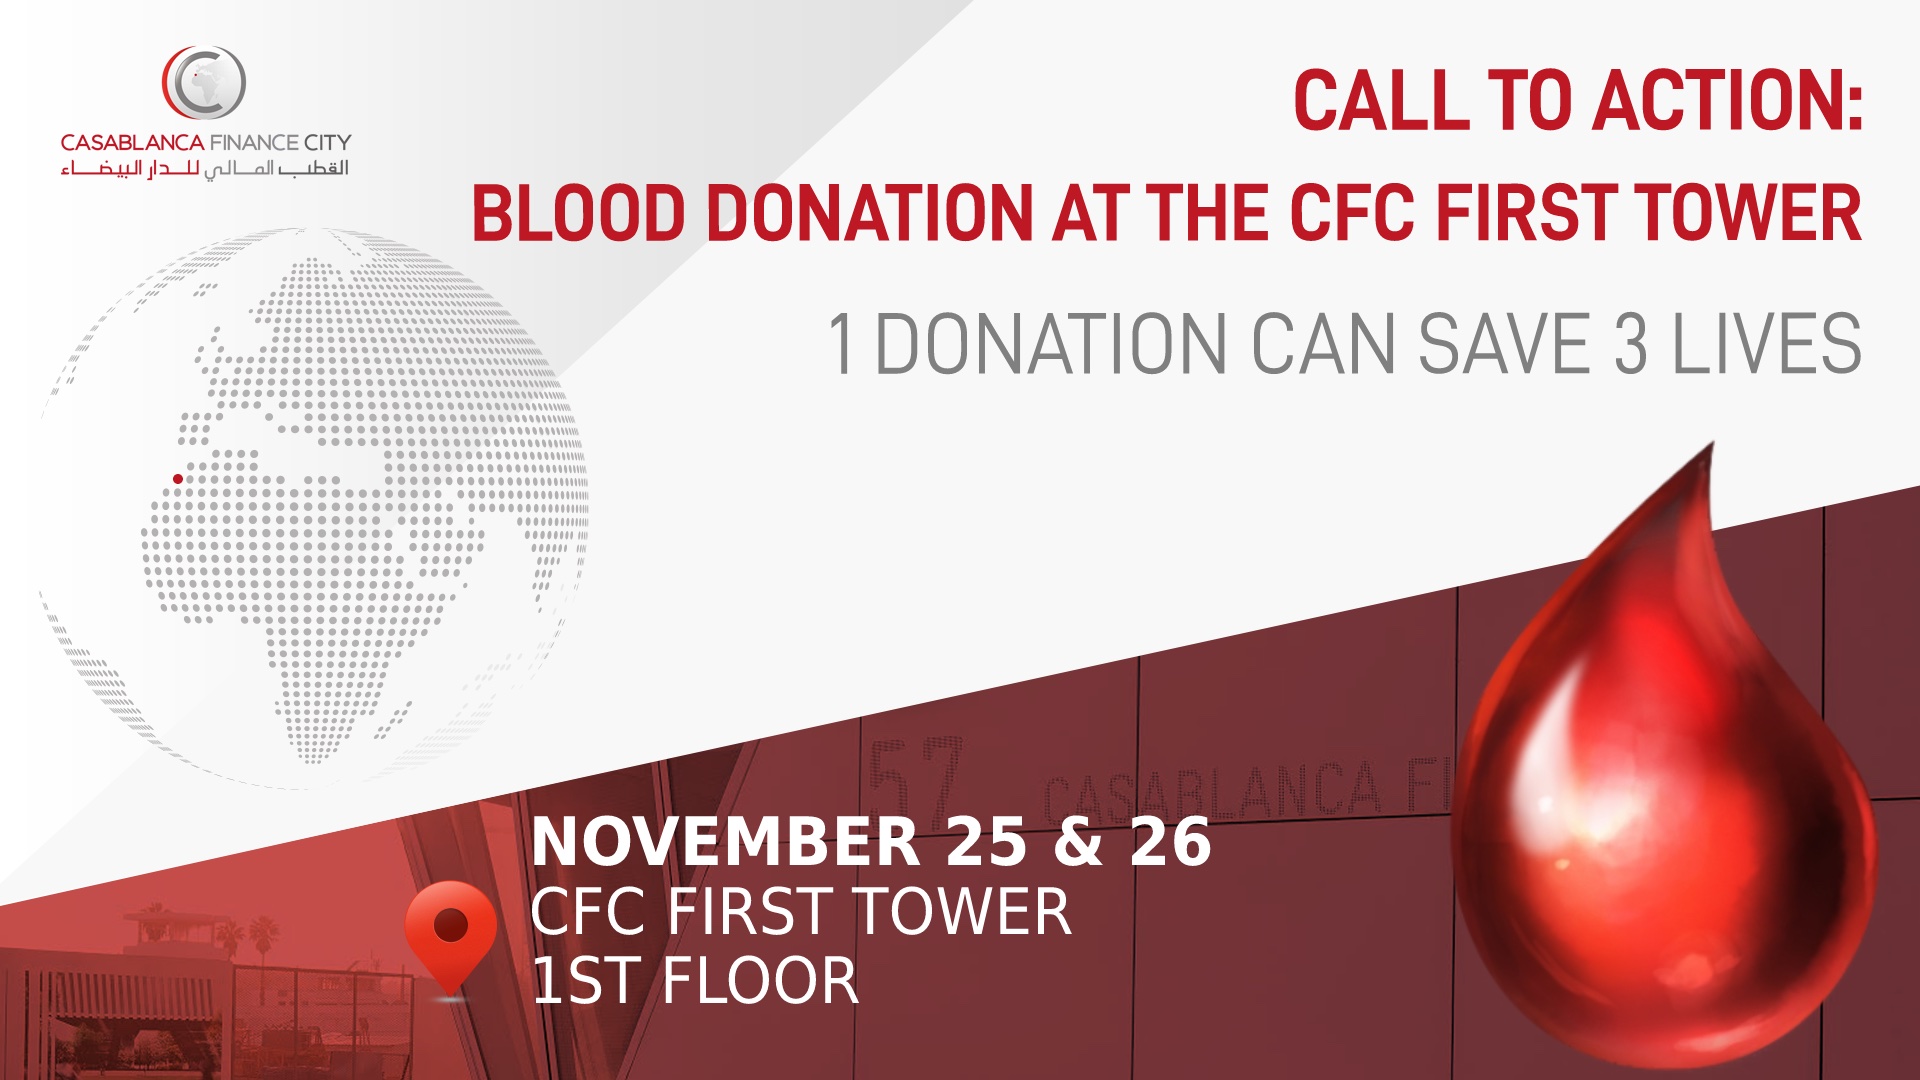 Blood donation at CFC First tower